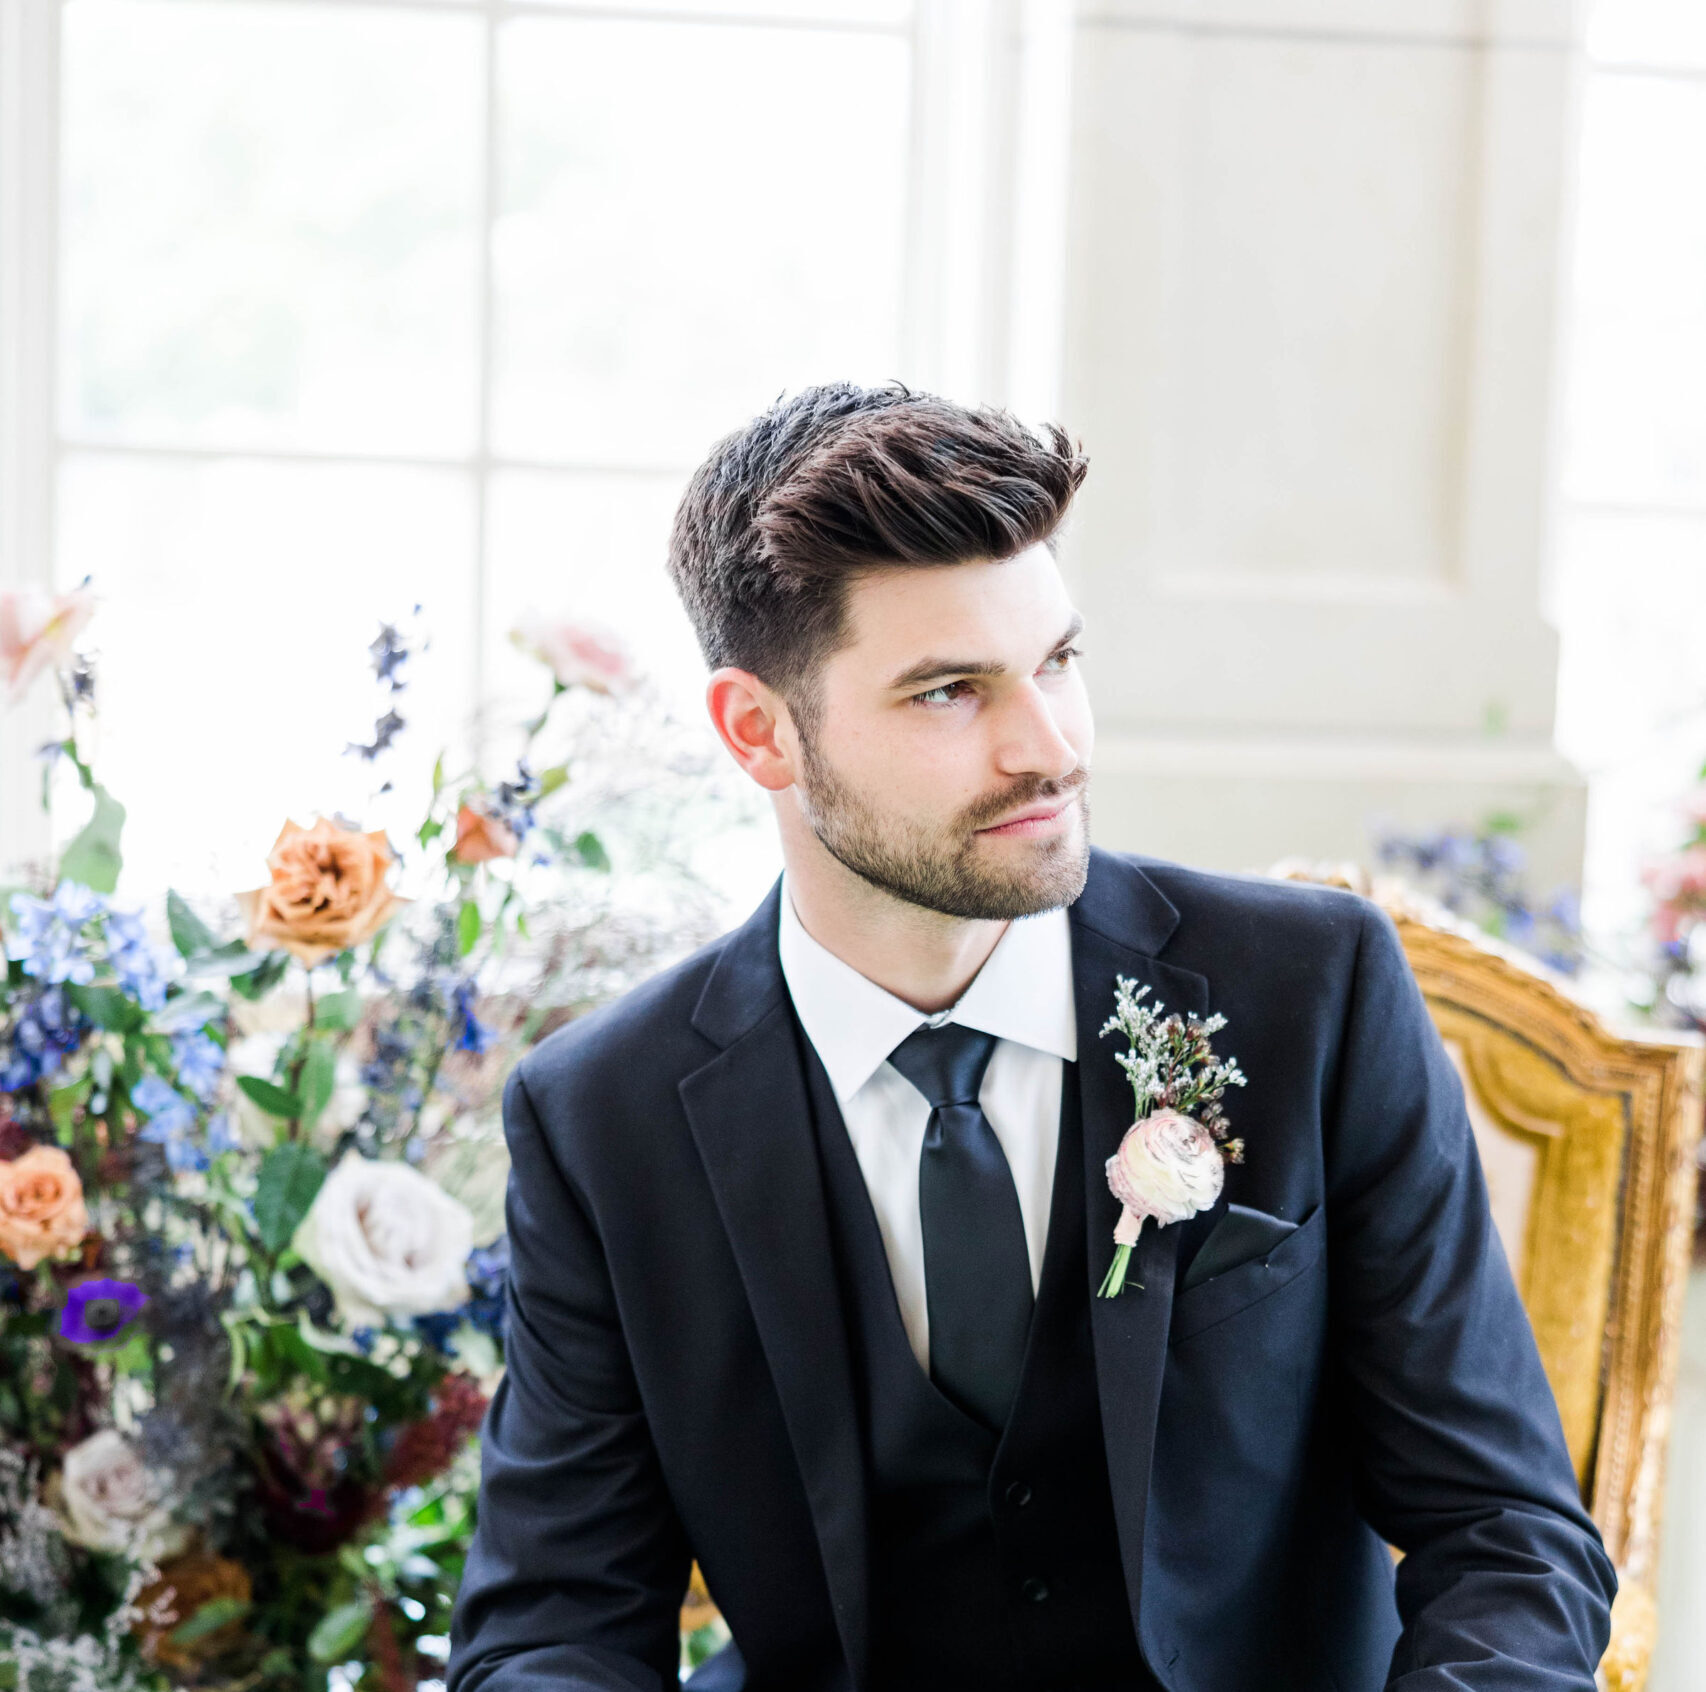 Groom sitting in a dark fall wedding suit and tie waiting for his bride